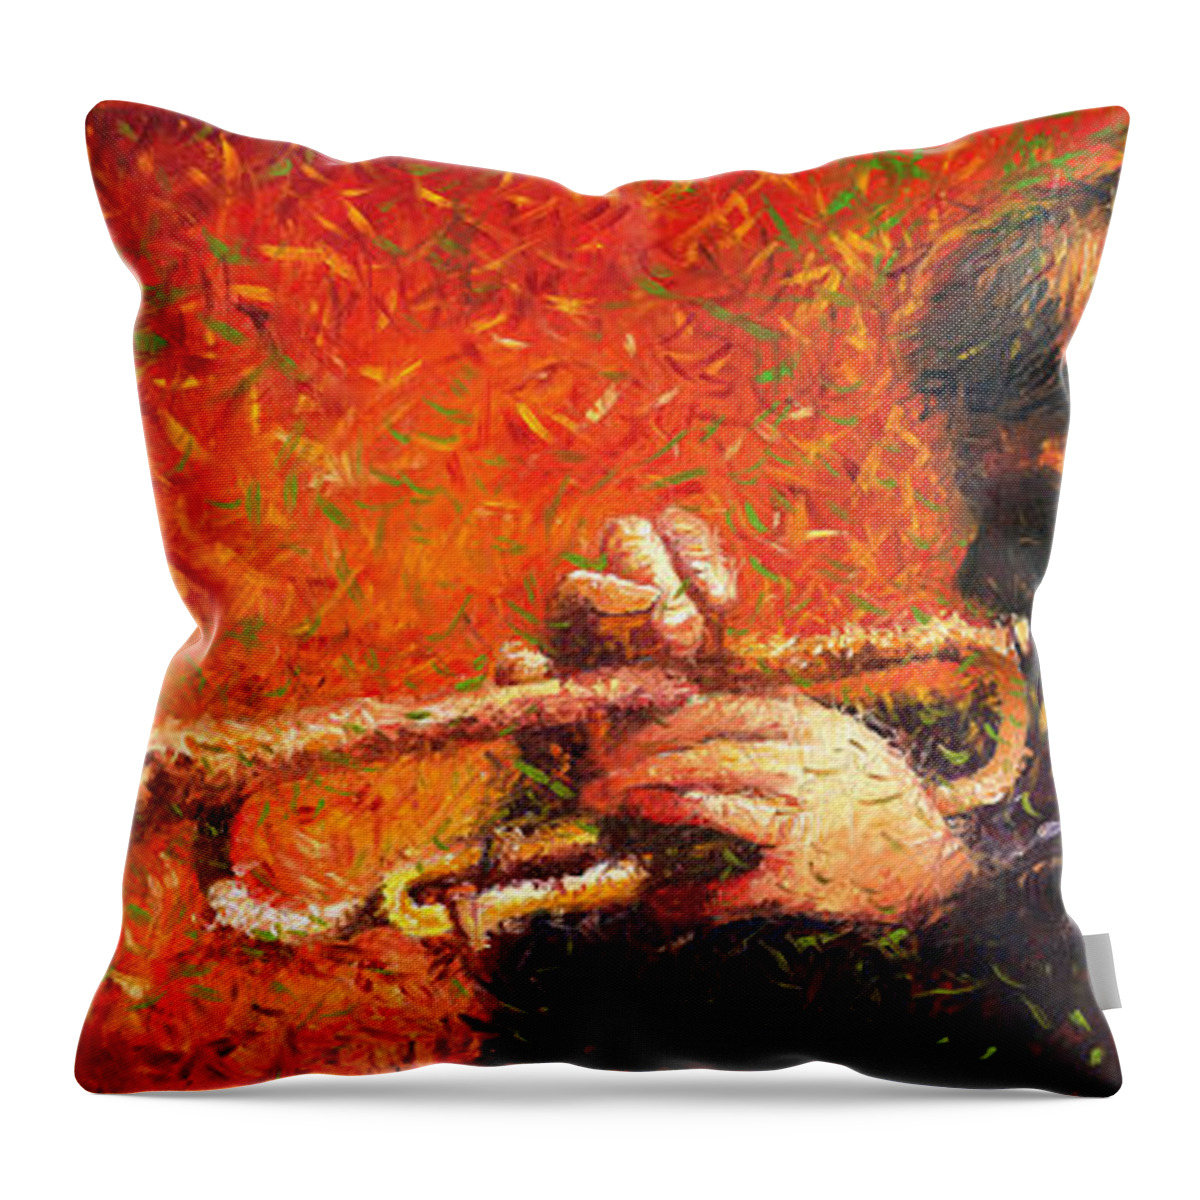 Jazz Throw Pillow featuring the painting Jazz Trumpeter by Yuriy Shevchuk